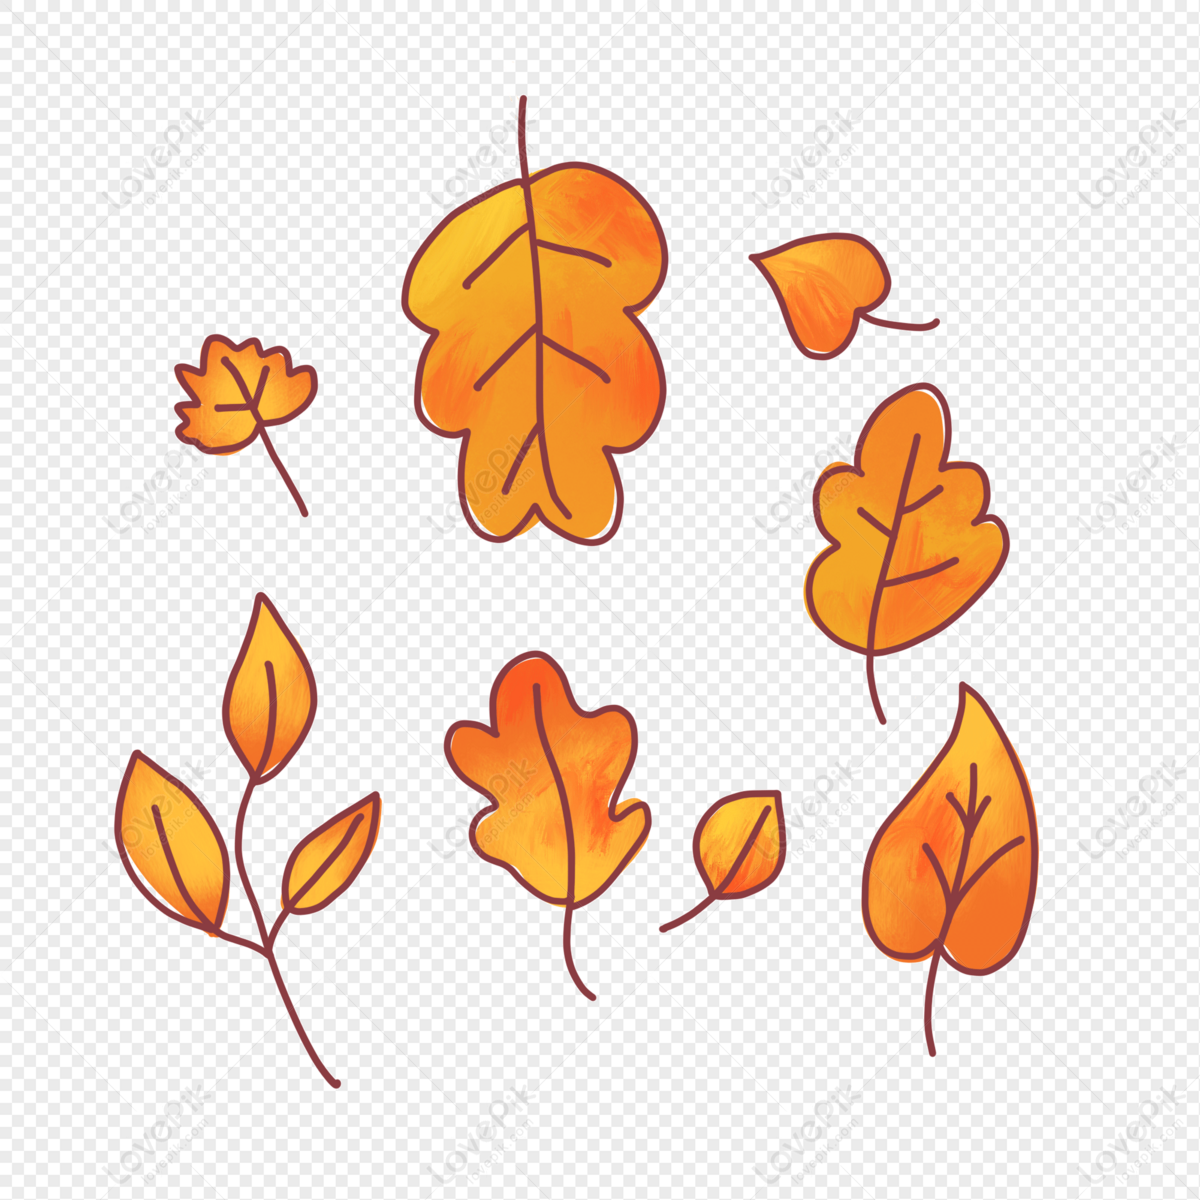 Autumn Leaves Leaf Clip art - Drawing autumn leaves png download -  3600*3600 - Free Transparent Autumn Leaves png Download. - Clip Art Library